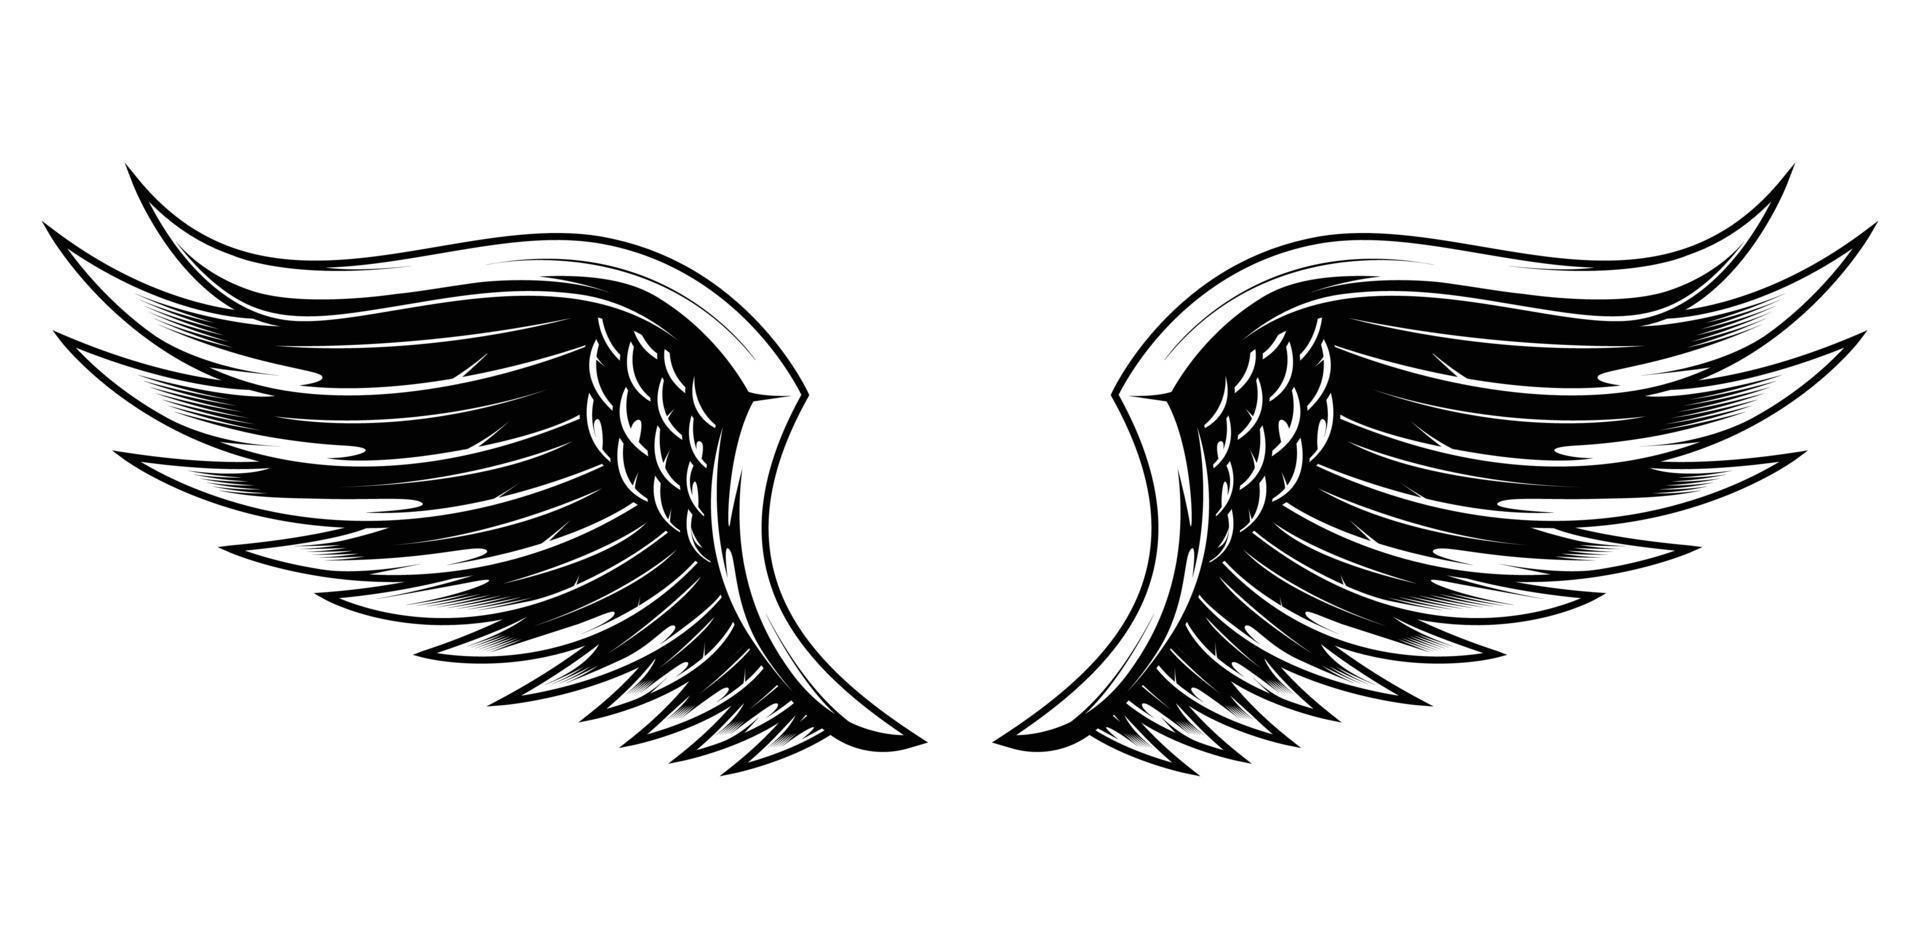 The Wings of Angel Black and White Vector